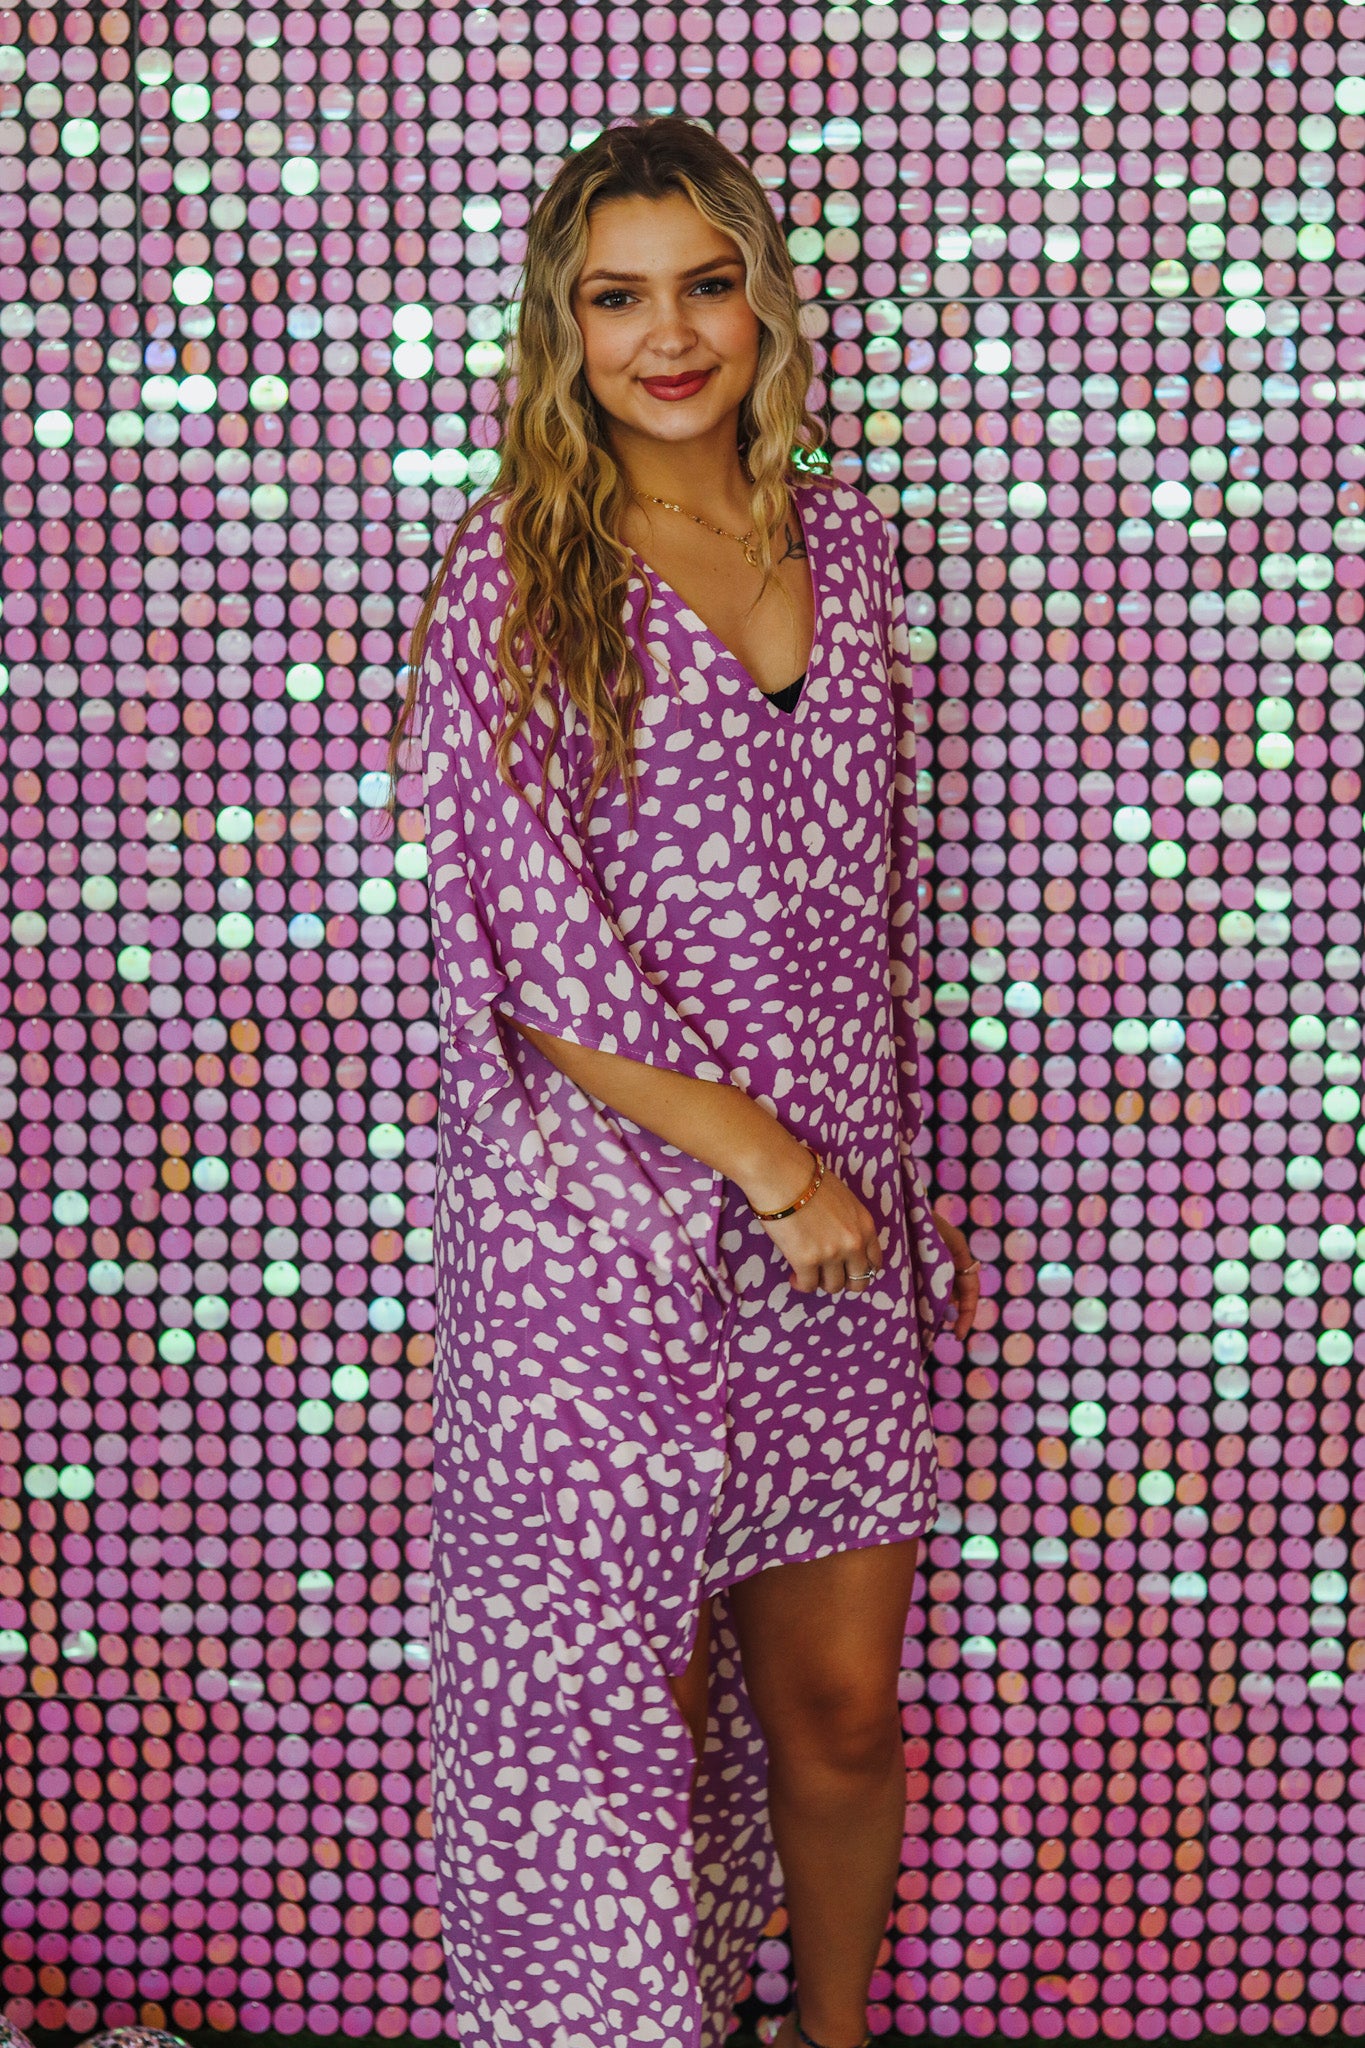 Feeling Bright Orchid Ivy Spotted Dress